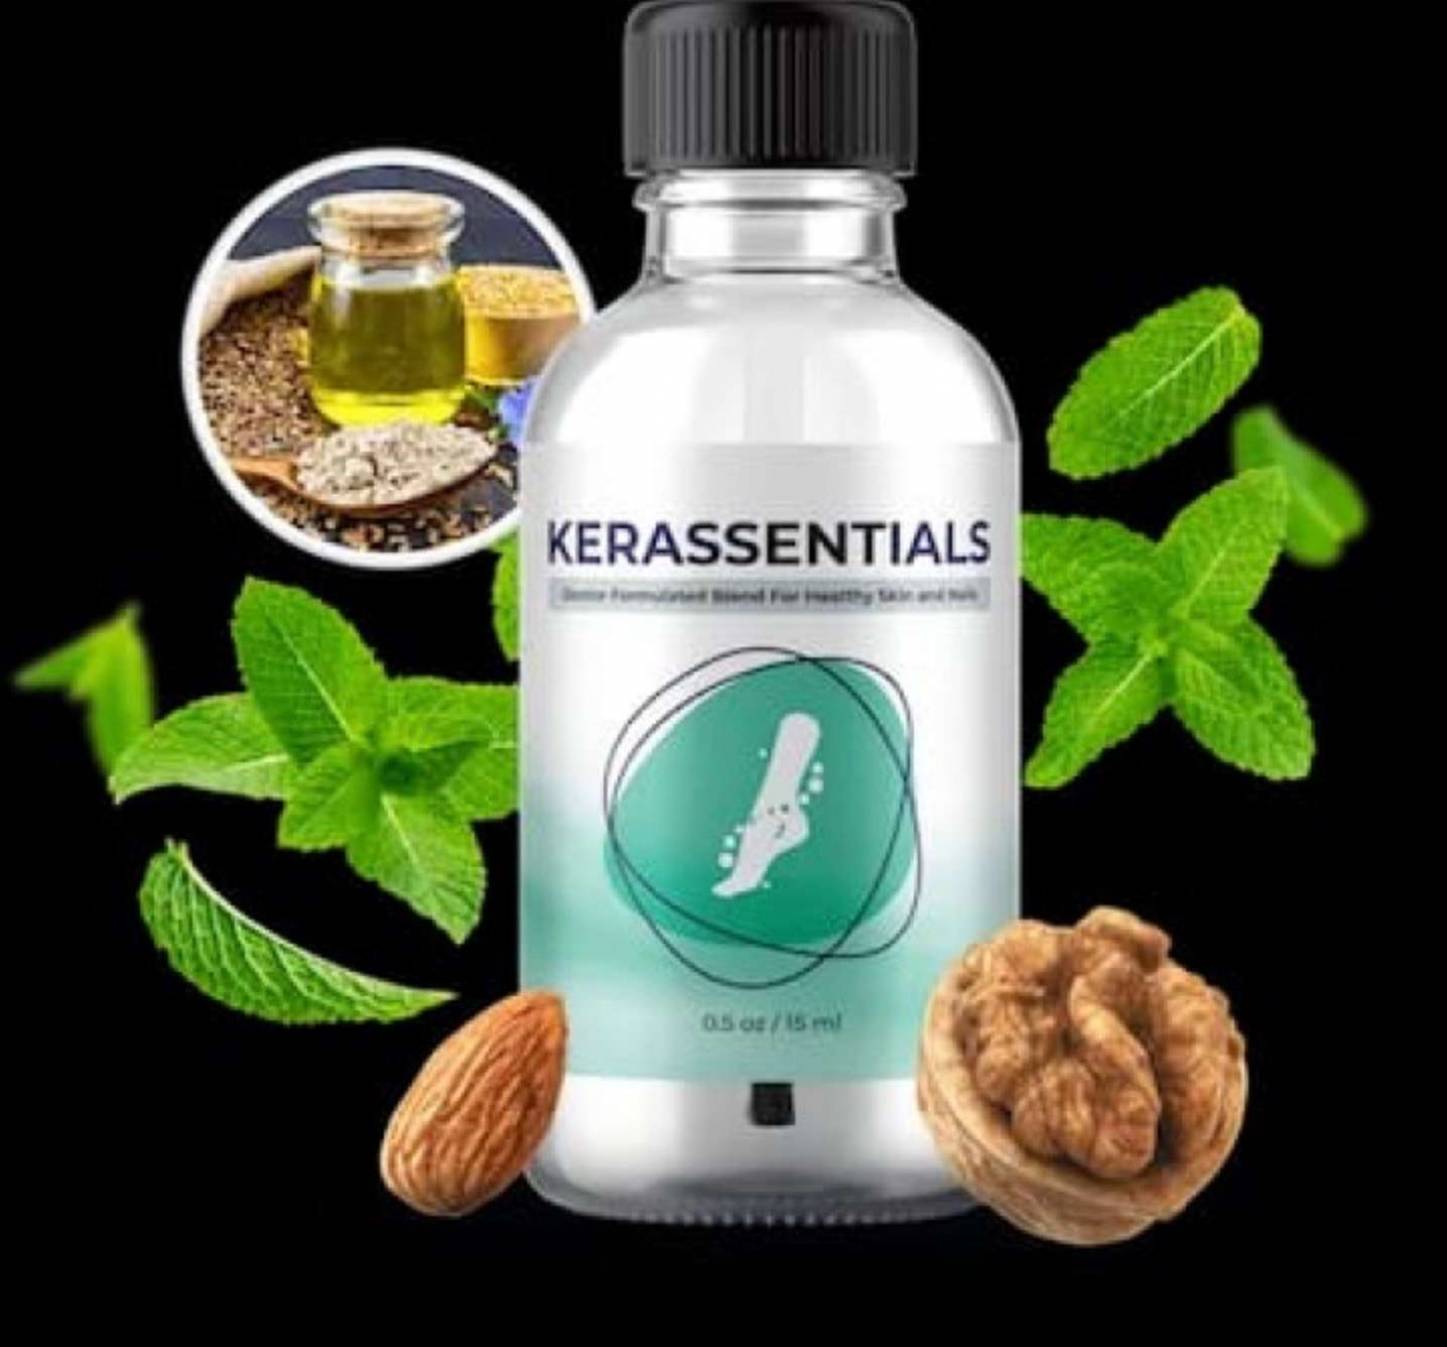 What Is Your Review On Kerassentials